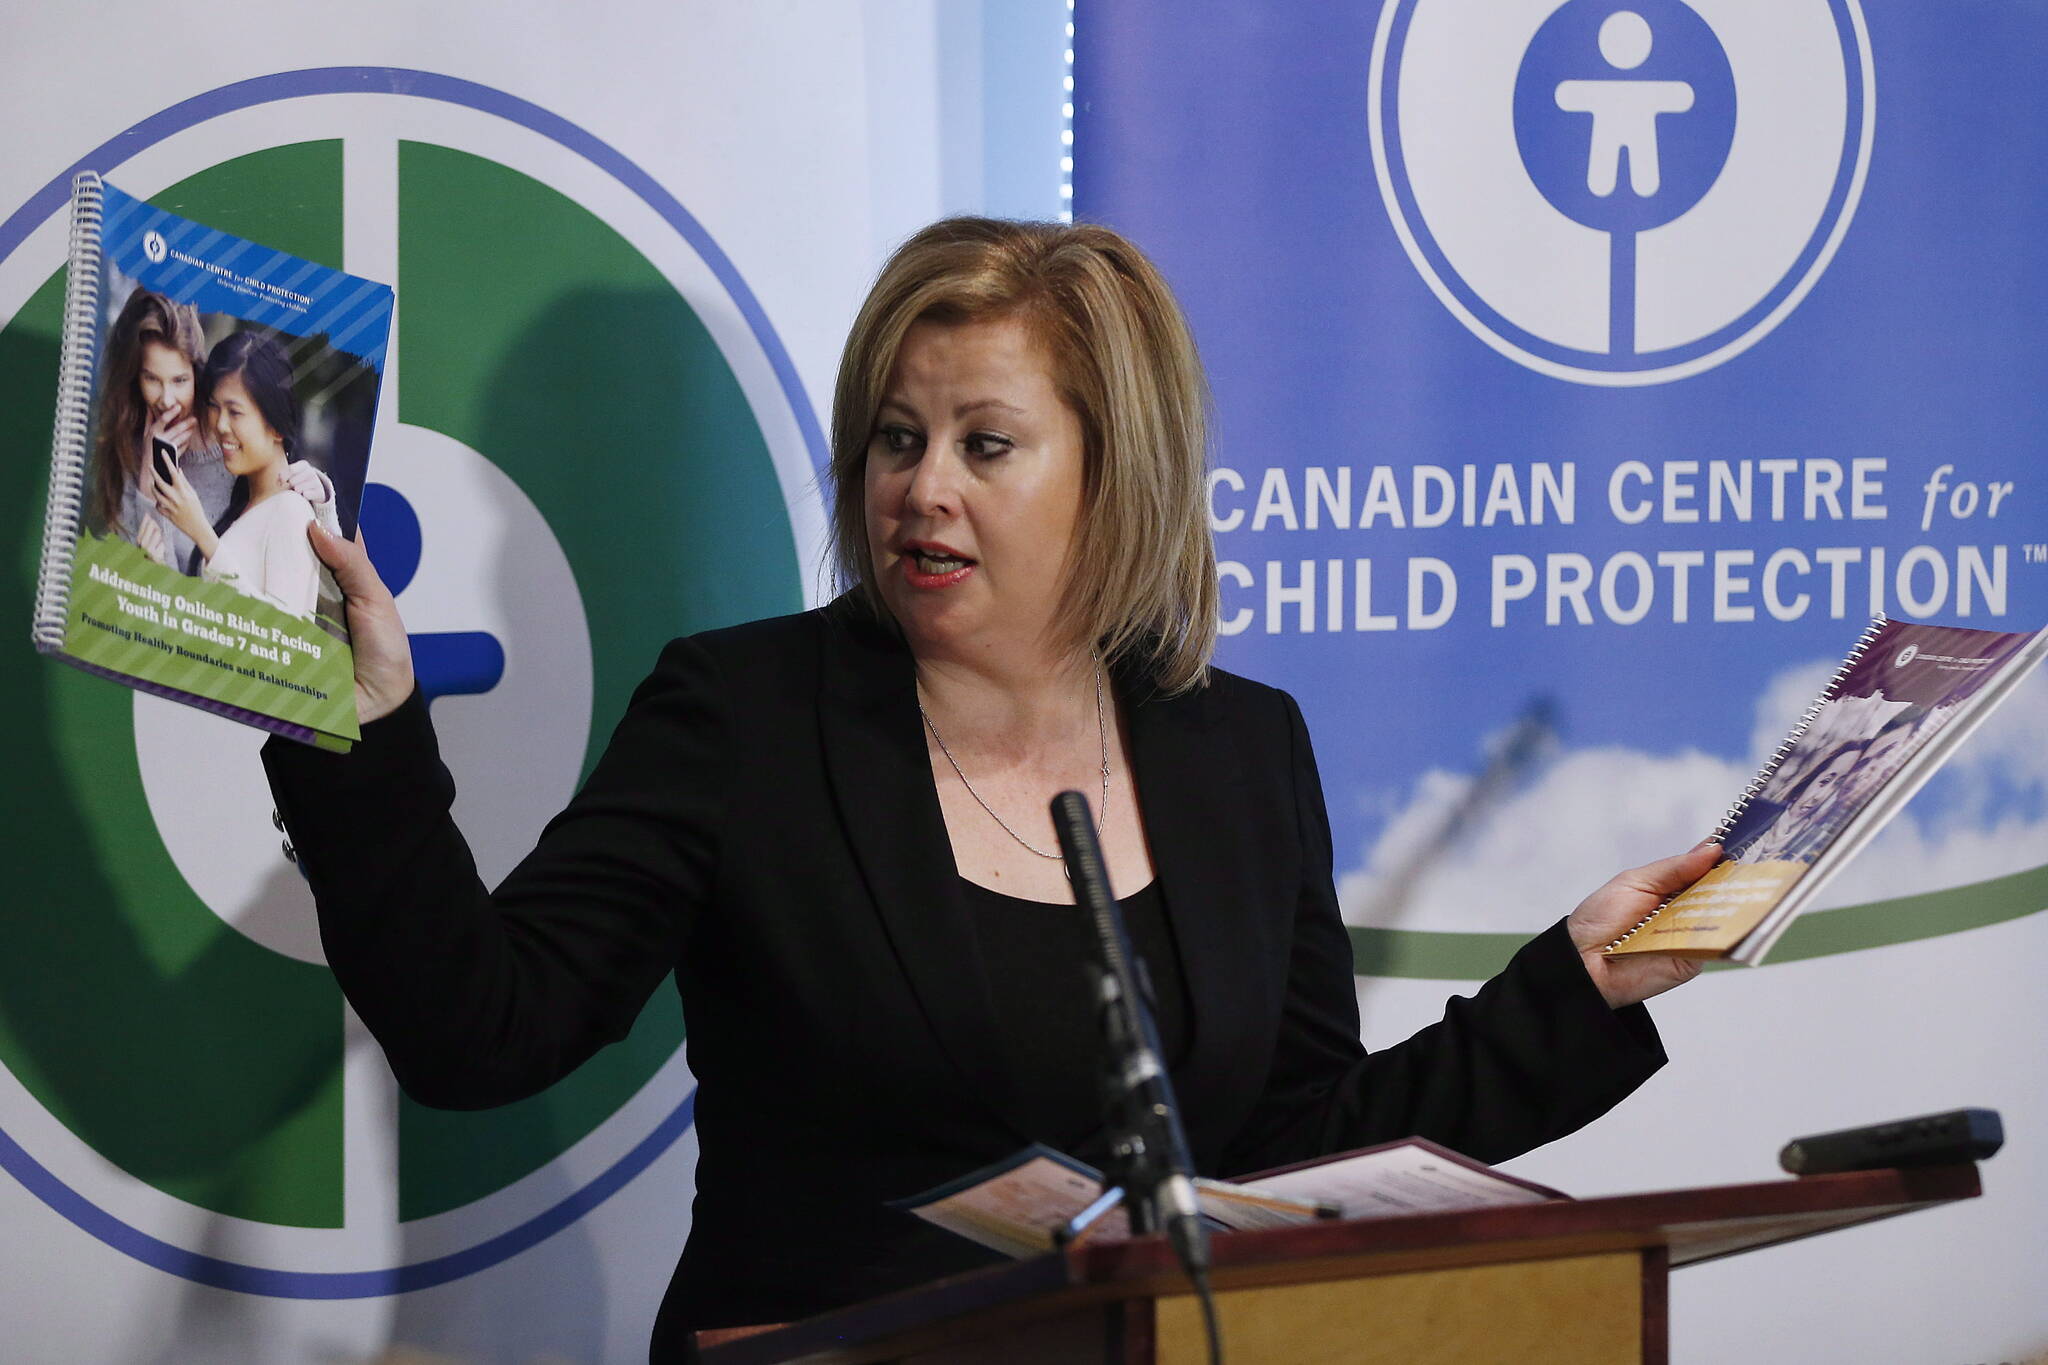 Lianna McDonald, Executive Director of the Canadian Centre for Child Protection, holds text books as she speaks at a press conference at the Canadian Centre for Child Protection in Winnipeg Wednesday, October 1, 2014. THE CANADIAN PRESS/John Woods